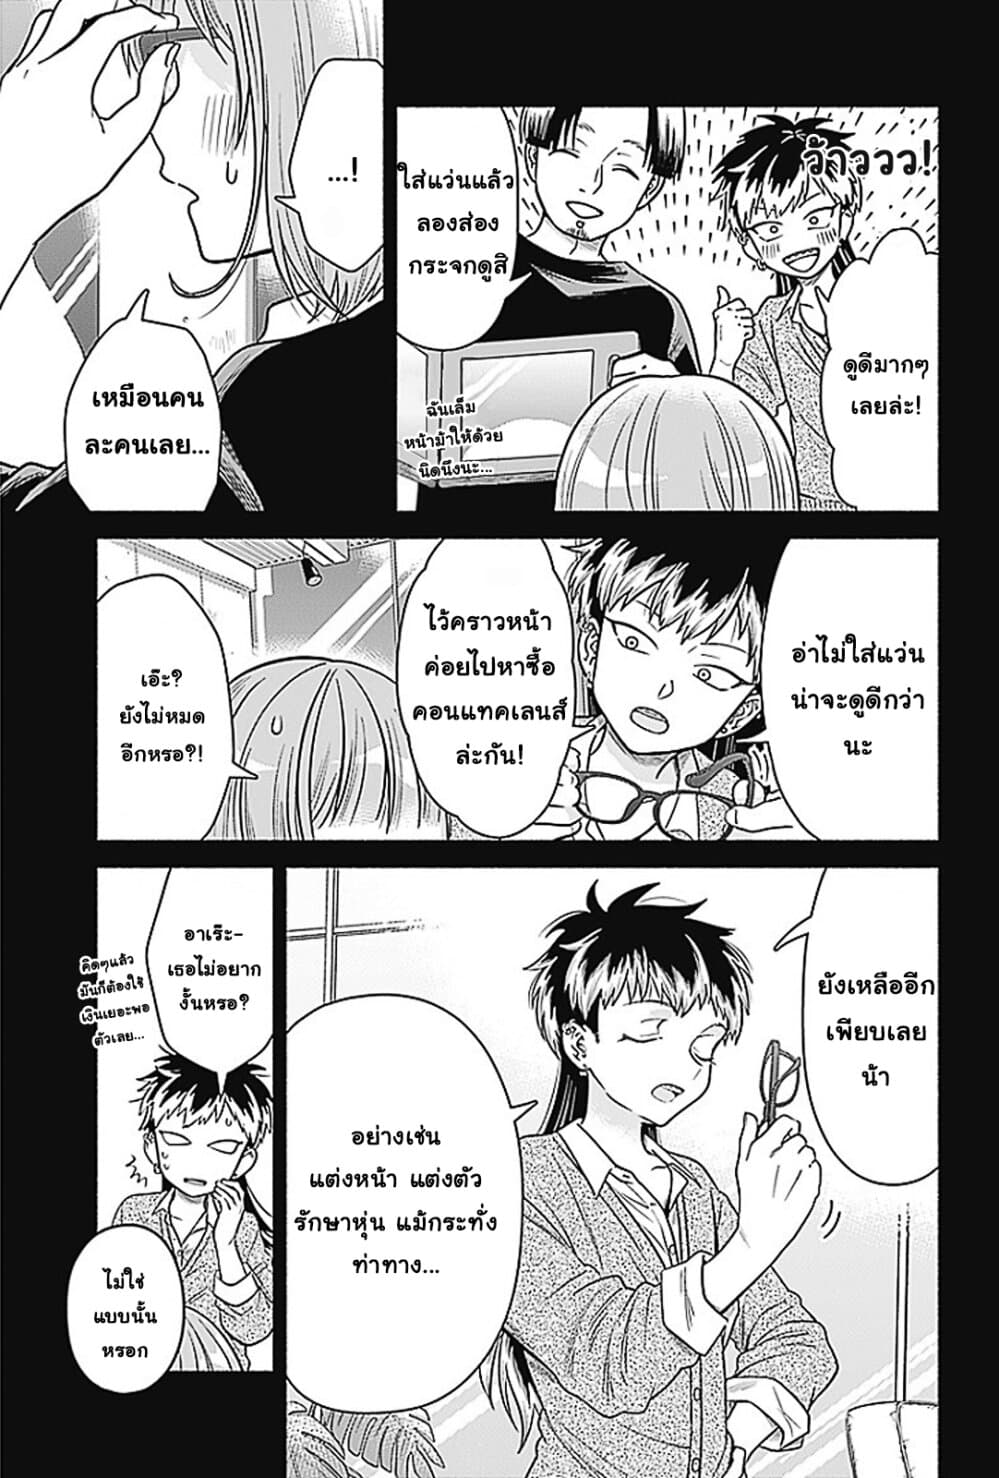 Marriage Gray 4 (7)